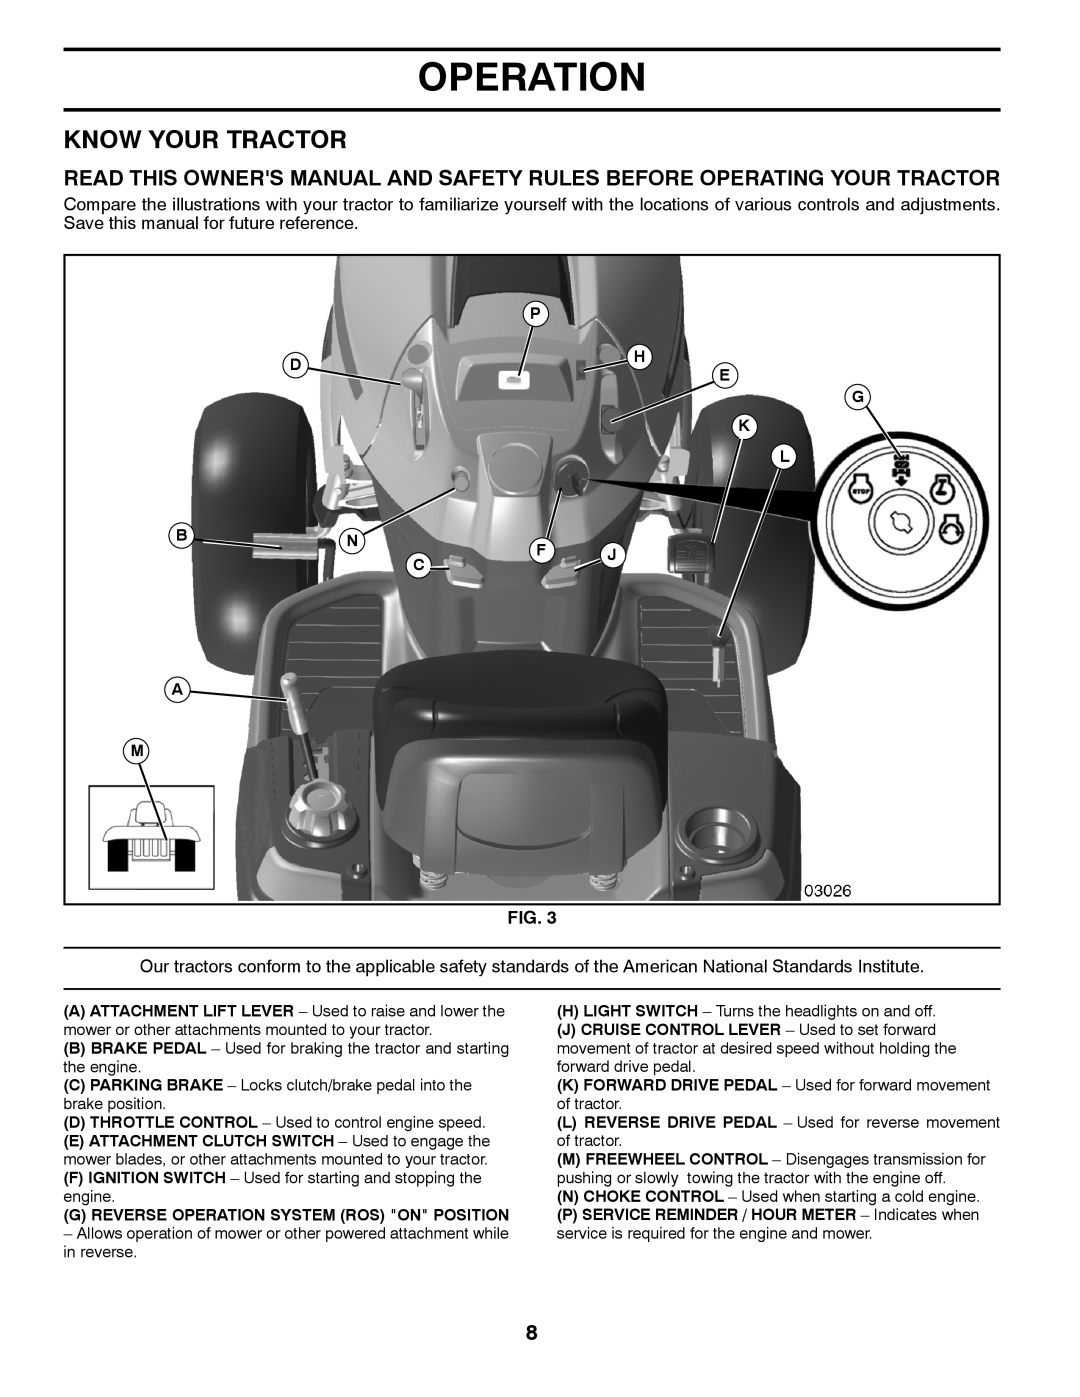 Husqvarna 96045000503 Know Your Tractor, P Dh E G K L B Nf J C A M, G Reverse Operation System Ros On Position 